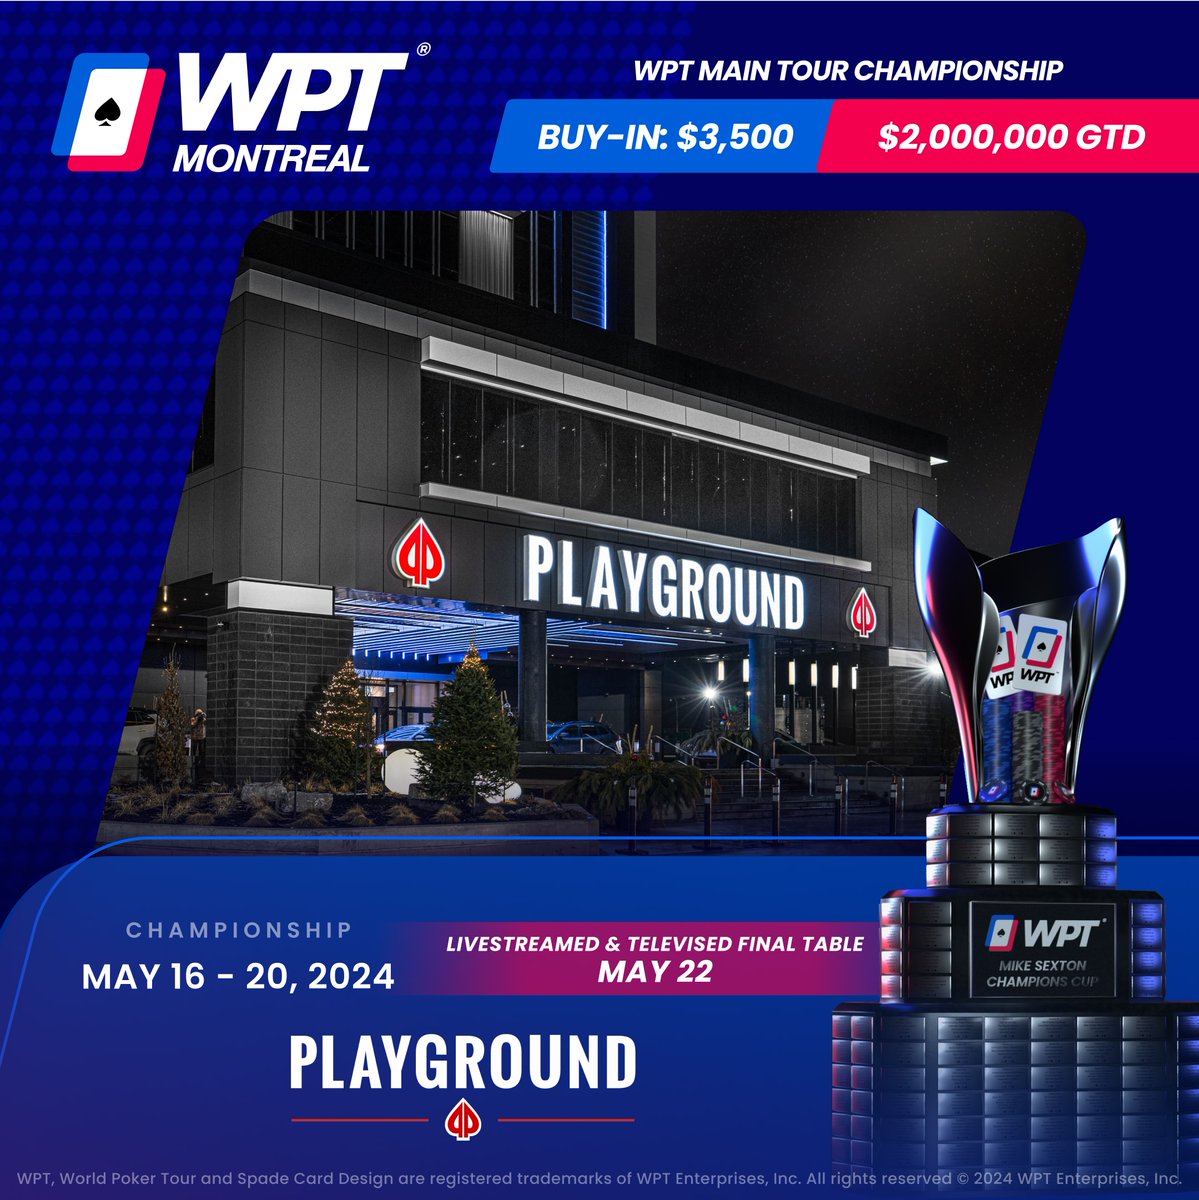 TOMORROW we kick off our @WPT Montreal Festival @PlaygroundPoker! 🇨🇦

$590 CAD #WPT500 $500k GTD: May 9 - 13
$1,150 CAD @WPTPrime $1M GTD: May 12 - 17
#WPTMUG: May 14 @ 12pm
$3,500 CAD @WPT Championship $2M GTD: May 16 - 20

More Info & Full Schedule: wpt.co/MontrealChampi…